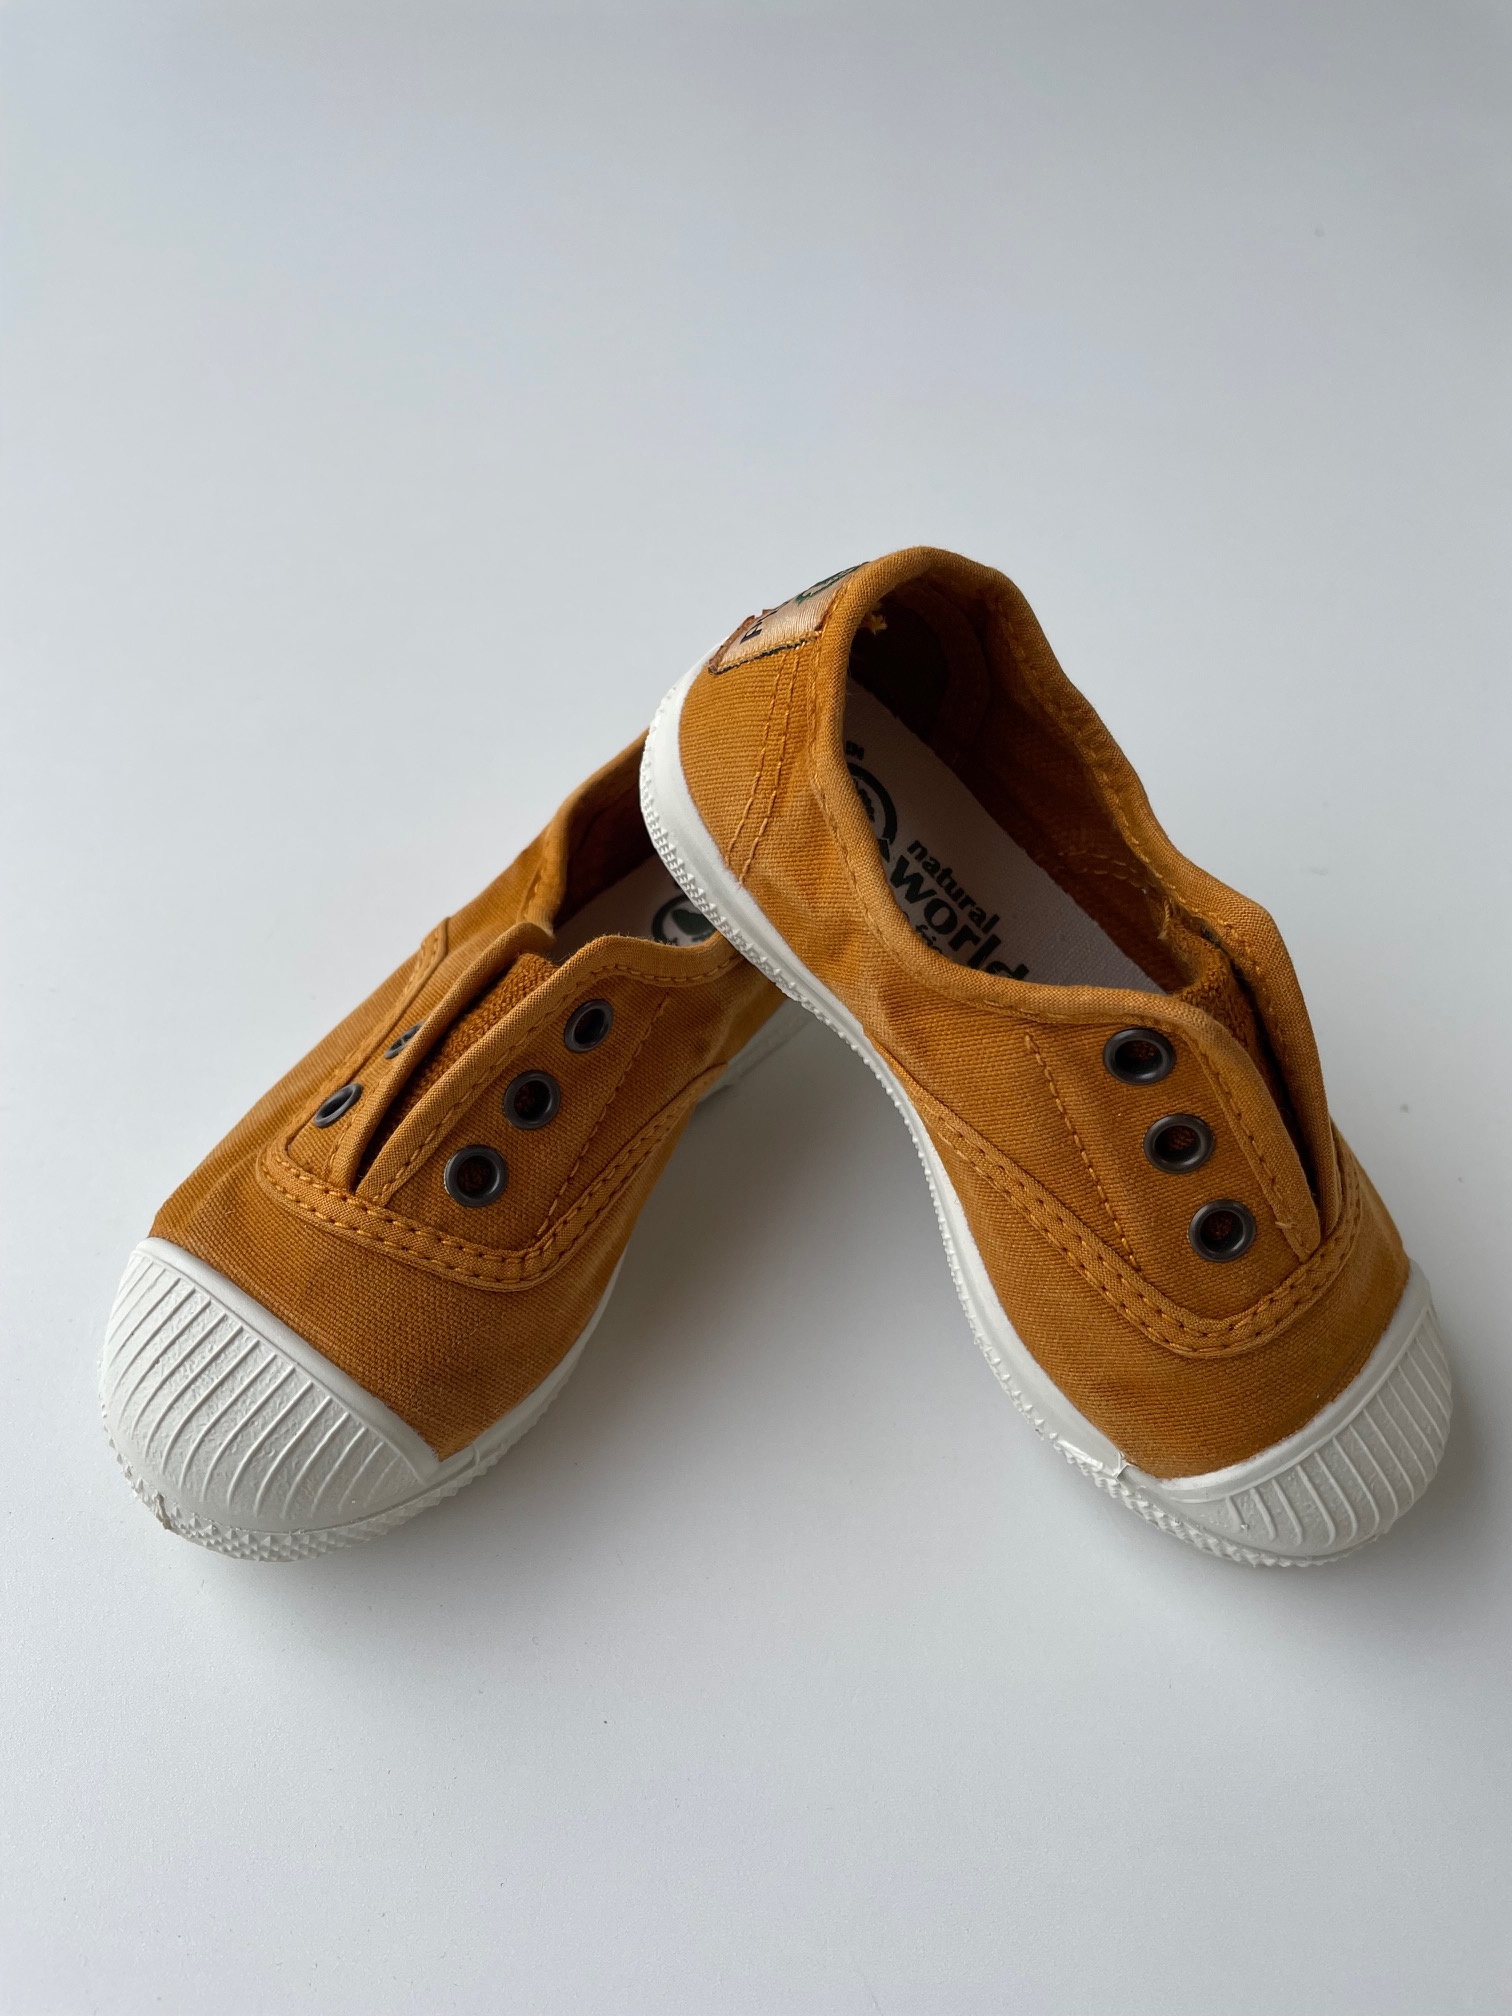 NATURAL WORLD eco kids sneakers OLD LAVANDA - organic cotton - stone washed ochre - 21 to 34